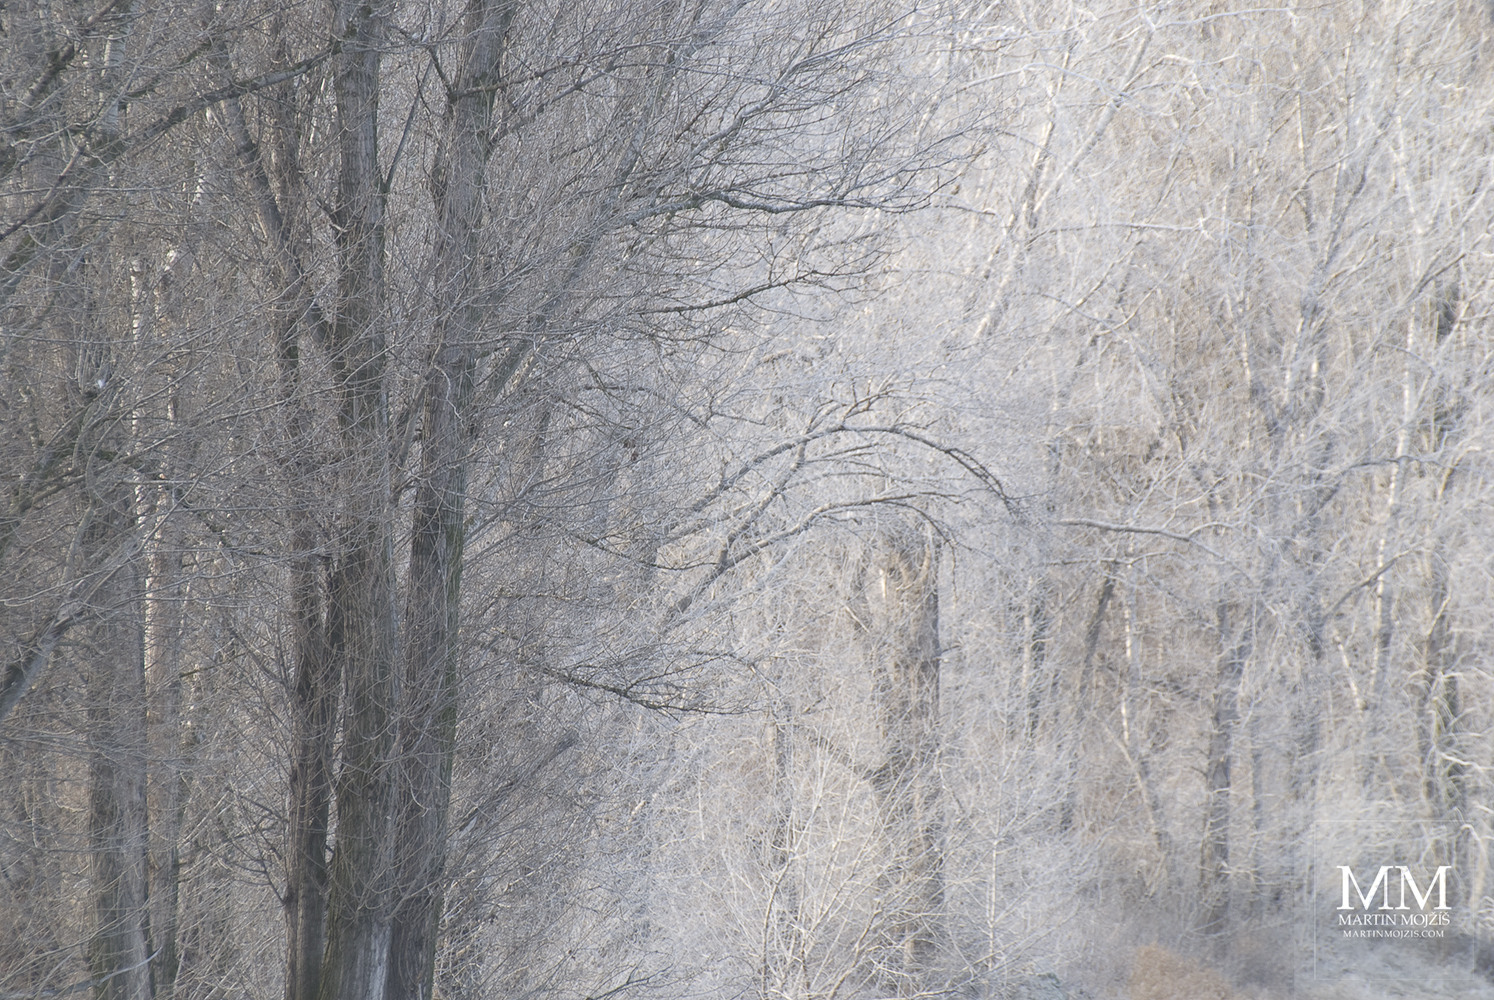 Shivering light in the misty, frosted branches of the trees. Fine Art photograph of Martin Mojzis with the title UNTOLD.